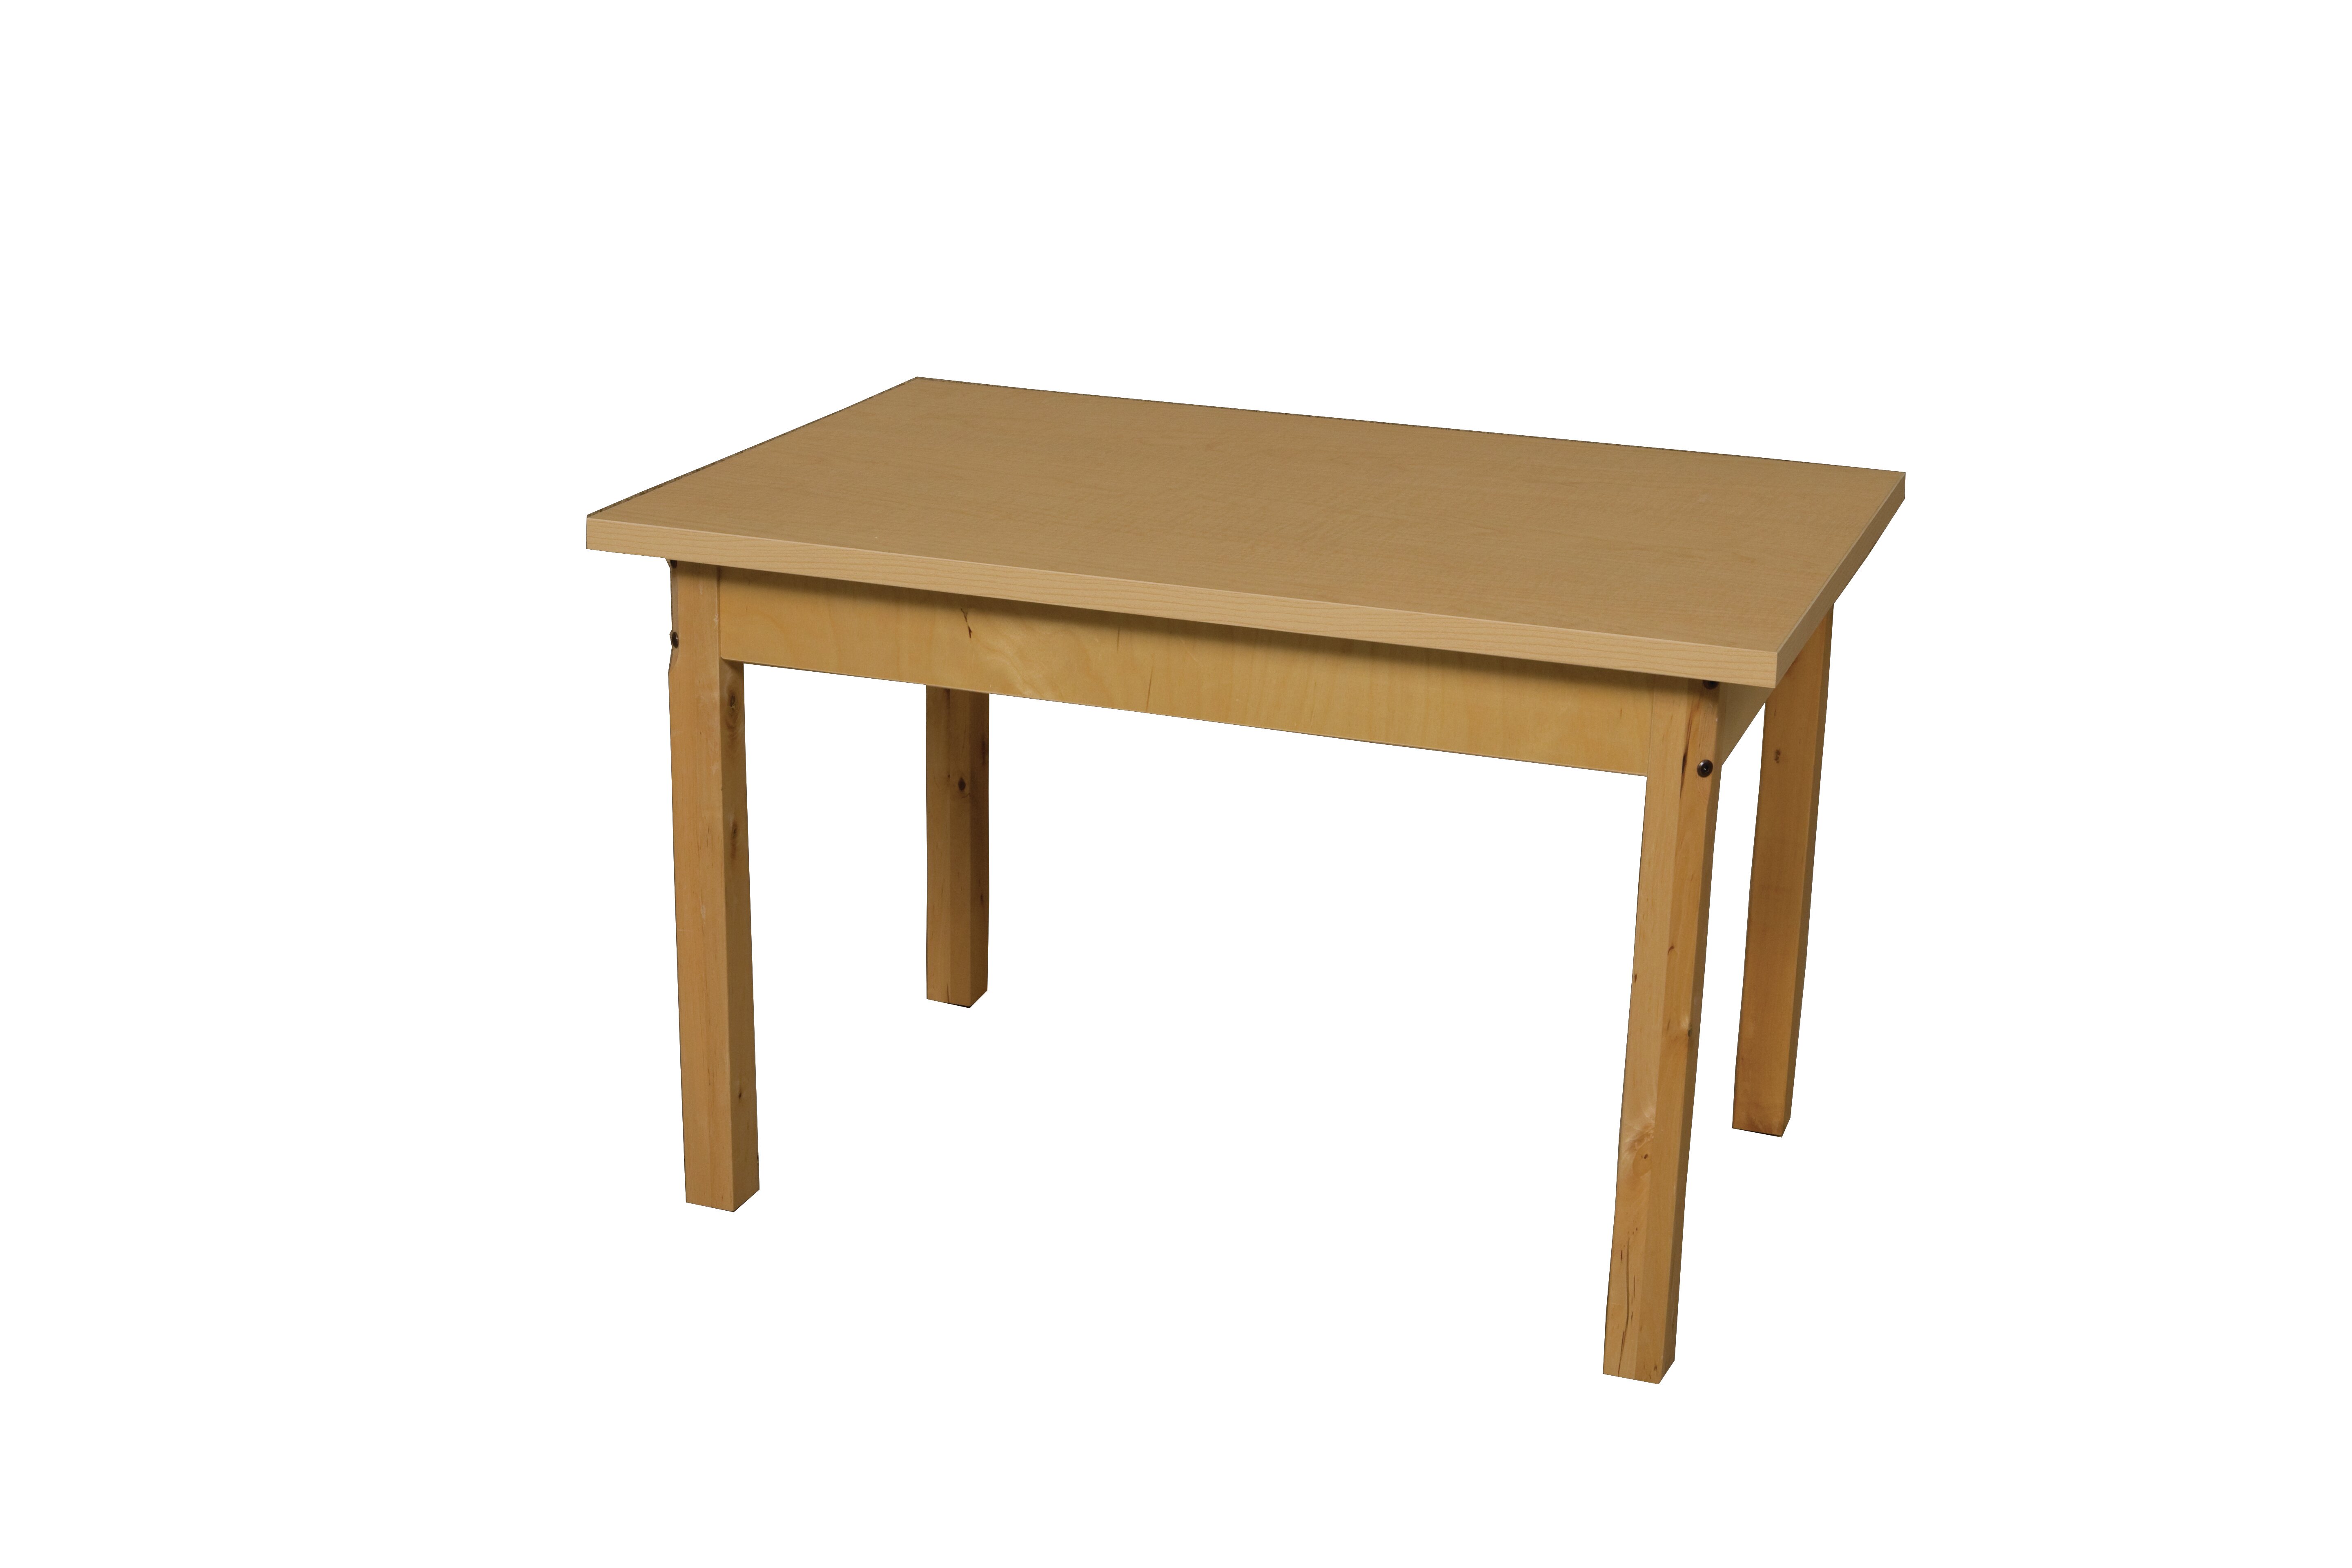 kids rectangle table